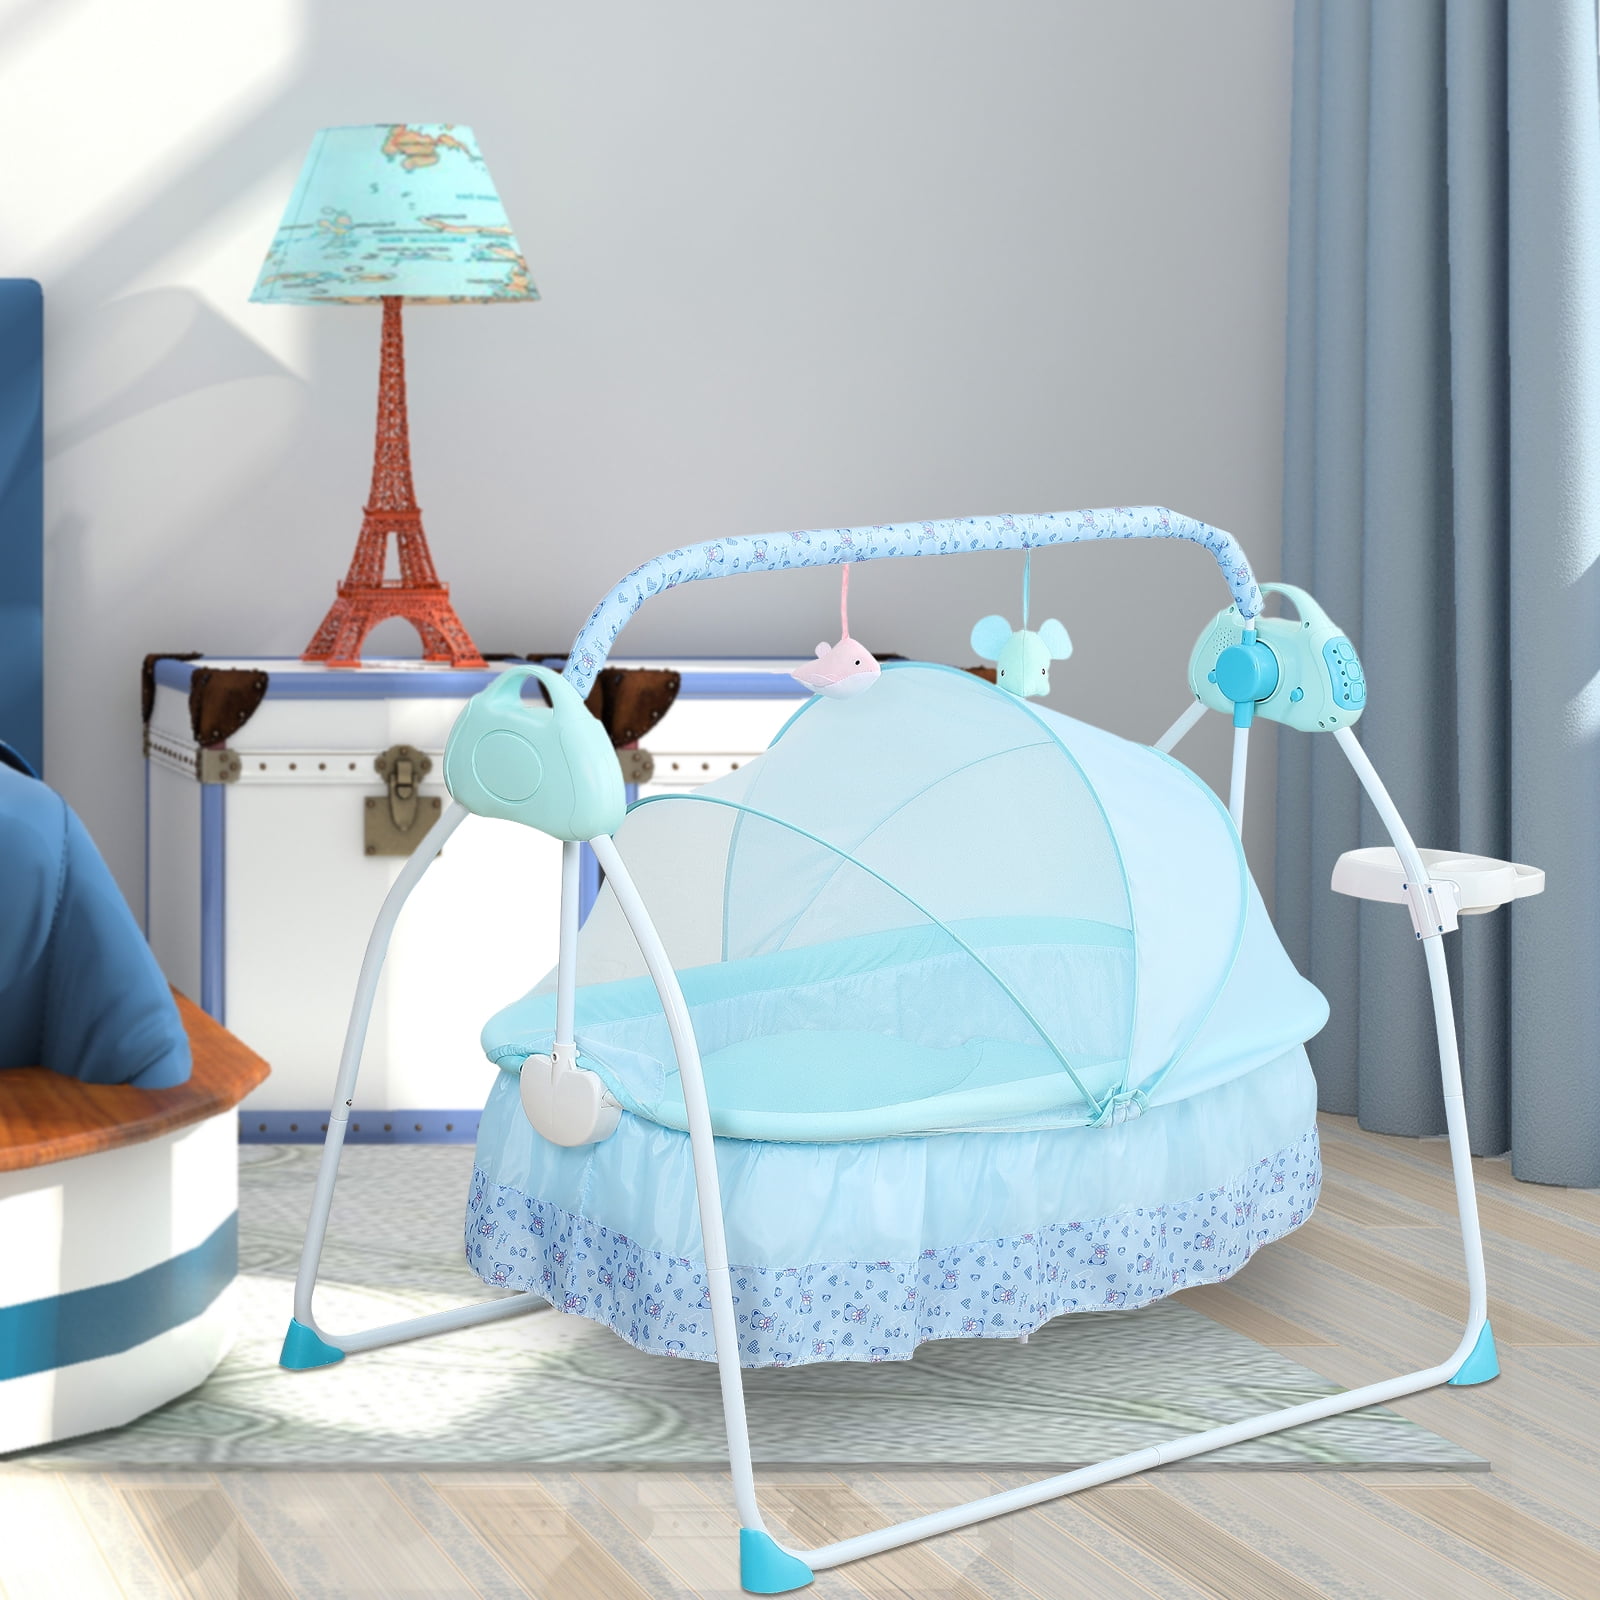 Color : Blue Balance Bouncer Cradle Baby Electric Auto-Swing Bed,Children Music Cradle Swing Safe Basket Space Crib Suitable for 0-24 Months Baby 